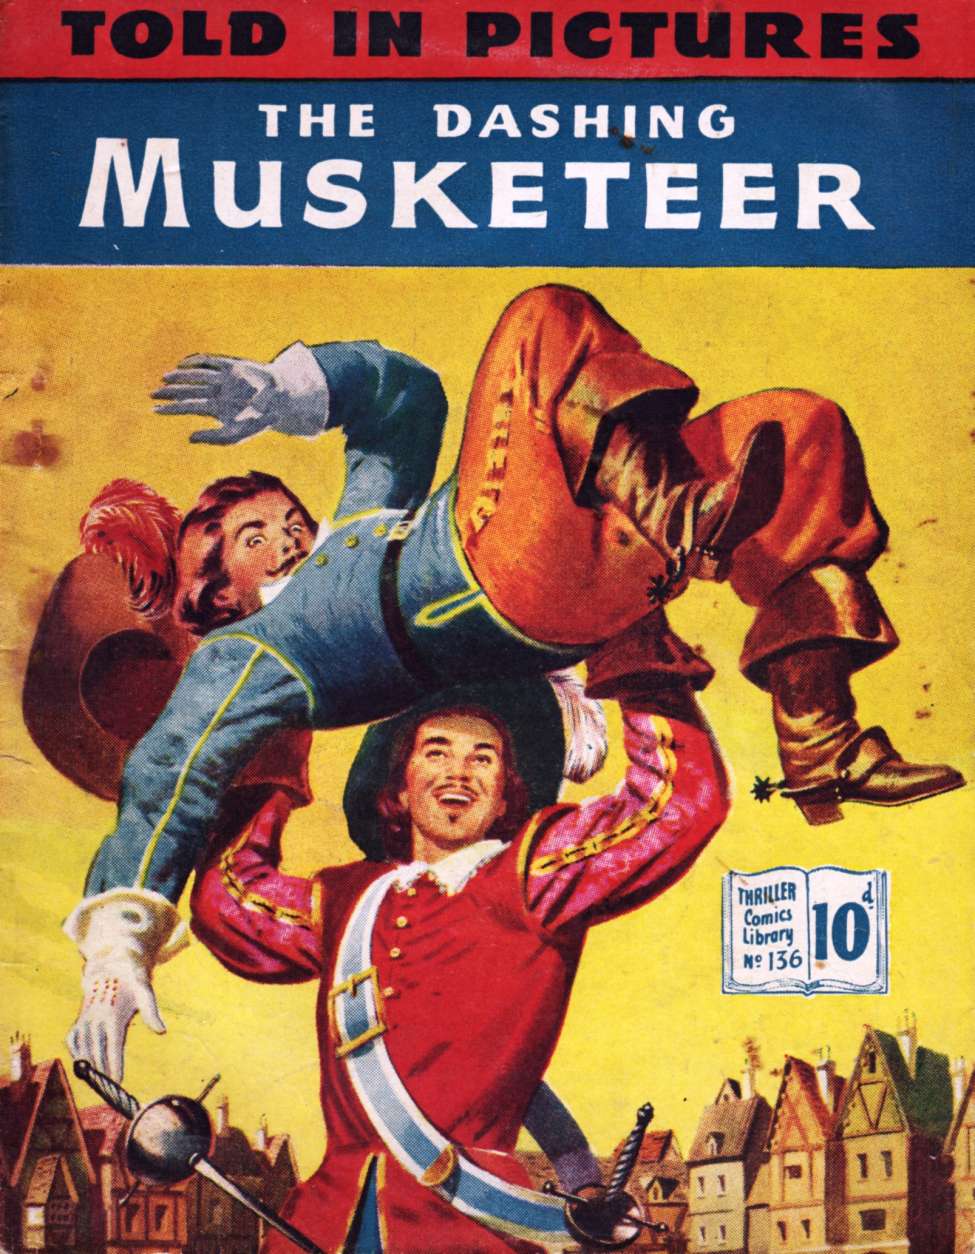 Comic Book Cover For Thriller Comics Library 136 - The Dashing Musketeer